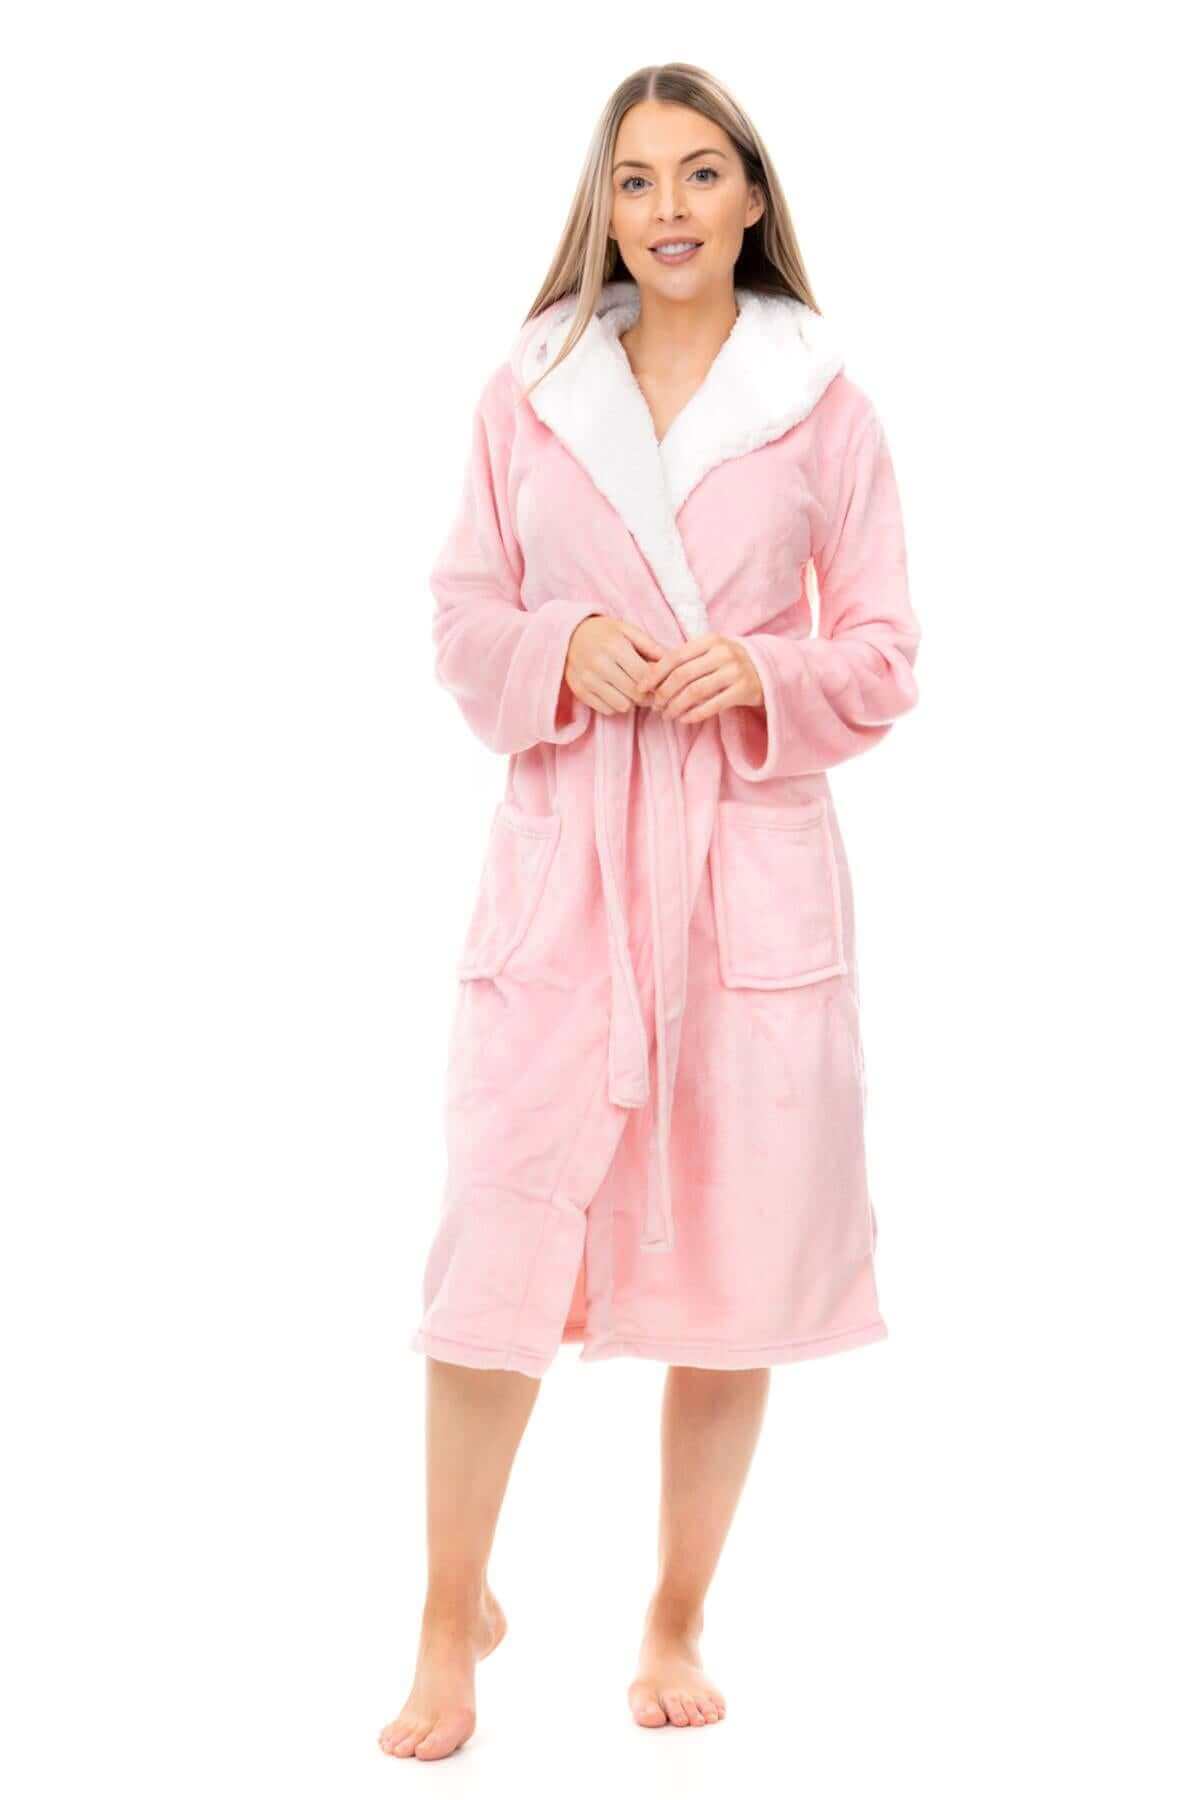 Women's Super Soft Plush Fleece Hooded Dressing Gowns, Ladies Bath Robes & Housecoats. Buy now for £20.00. A Robe by Daisy Dreamer. 12-14, 14-16, 16-18, 20-22, 8-10, black, bridesmaid, brown, charcoal, daisy dreamer, fleece, fluffy, girls, gold, gowns, gy